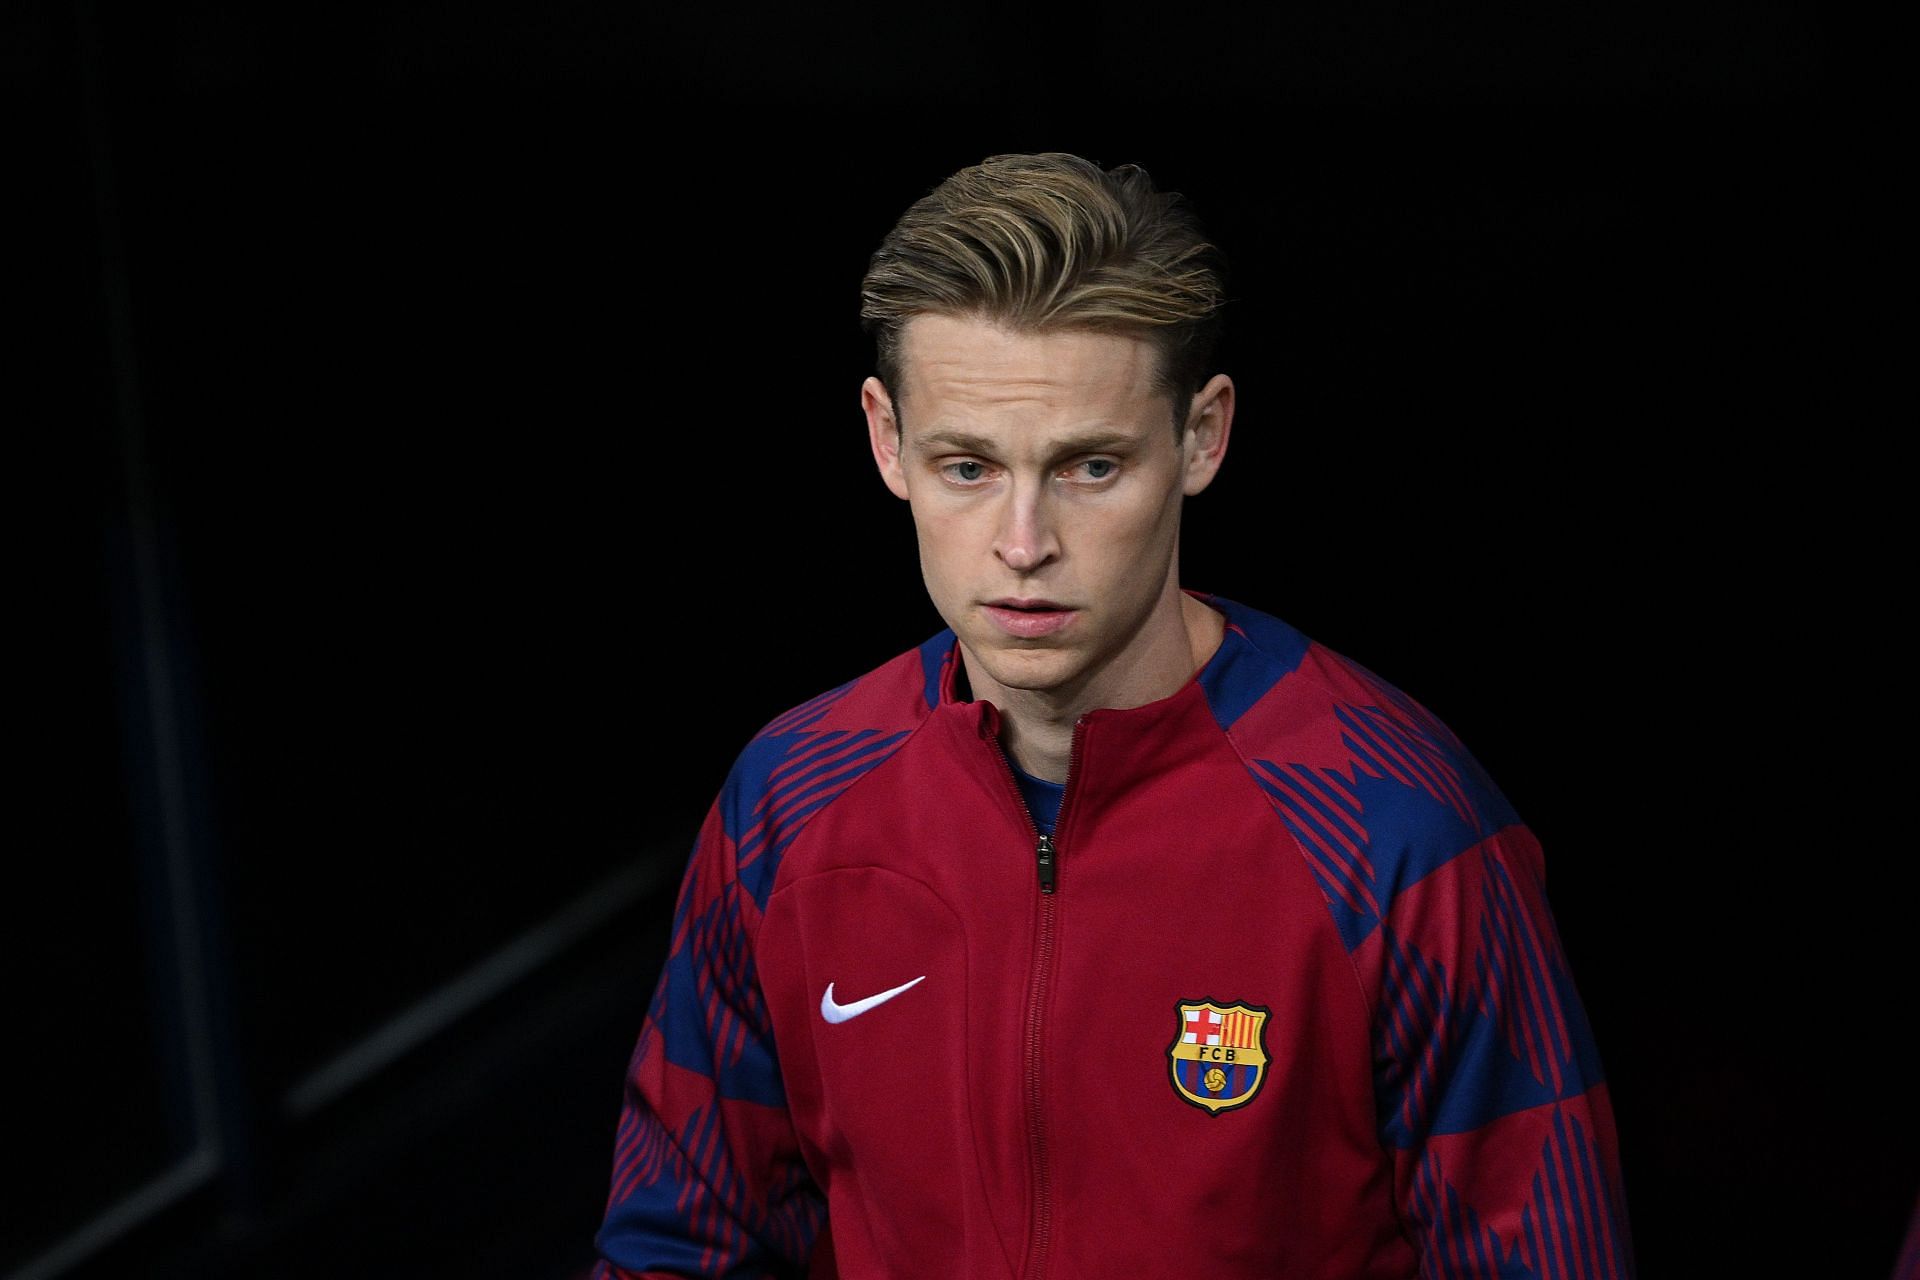 de Jong has claimed that he is happy at the Camp Nou.